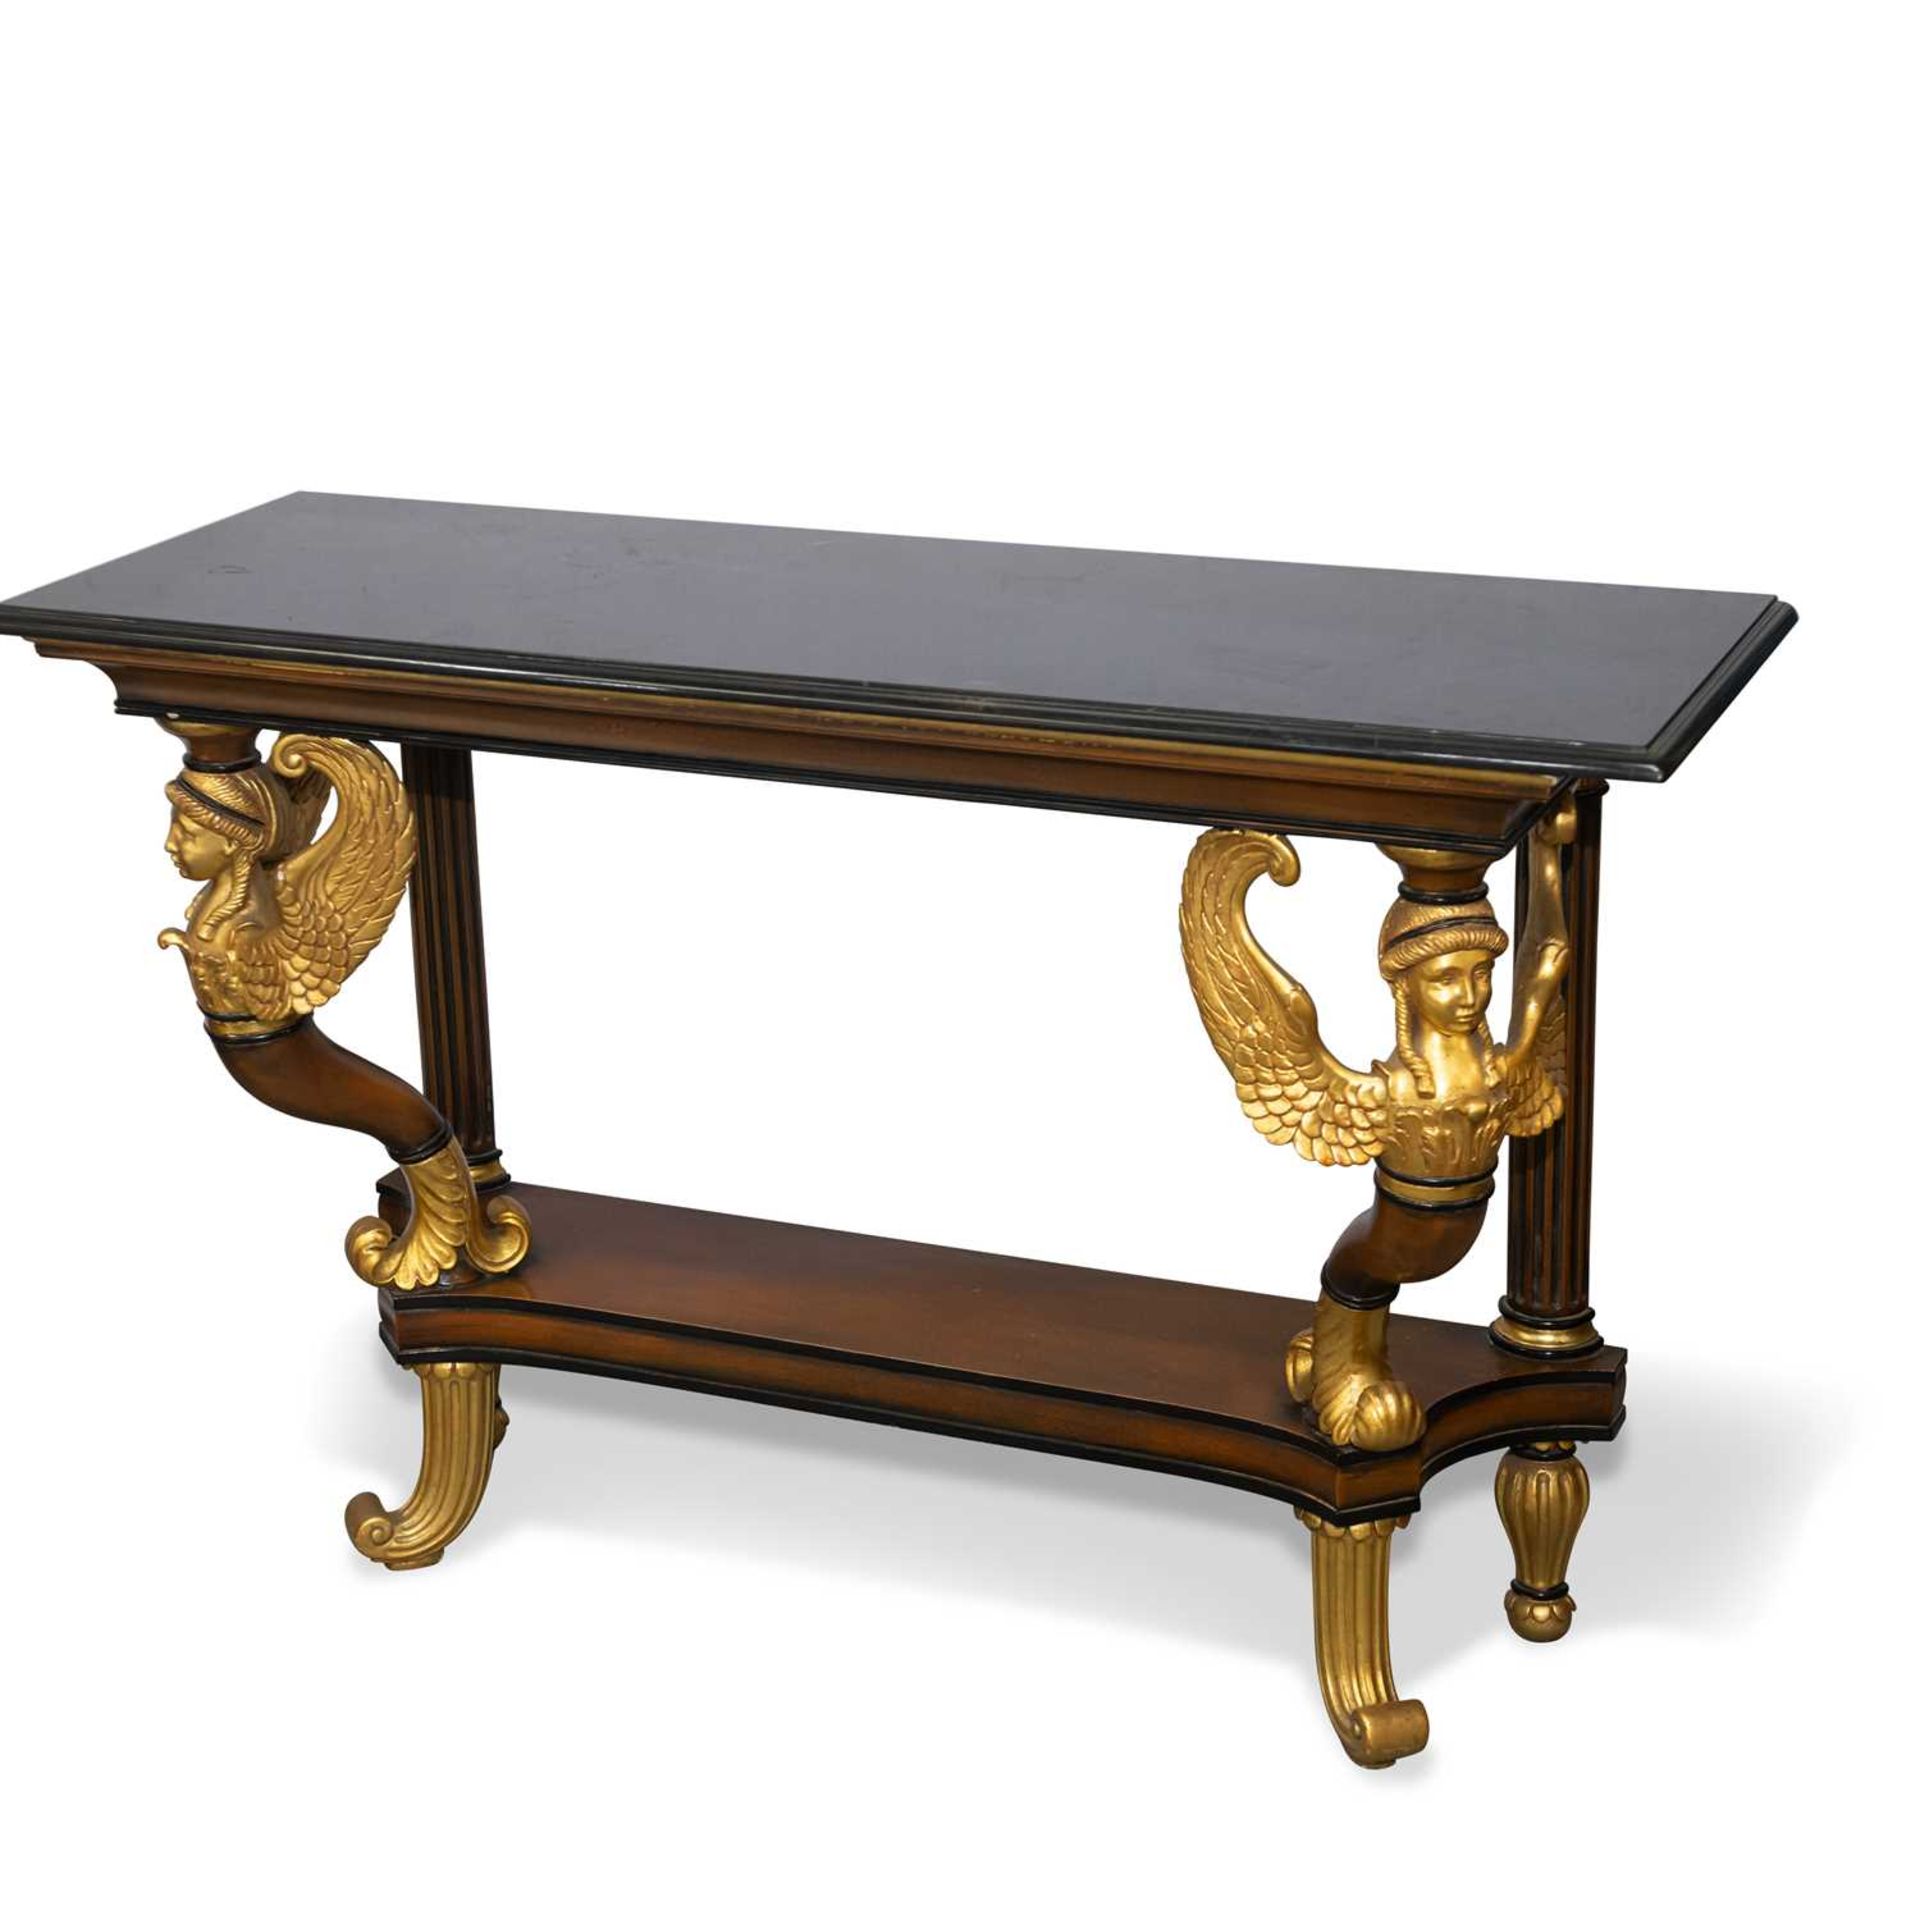 A MARBLE TOPPED PARCEL-GILT CONSOLE TABLE, 20TH CENTURY